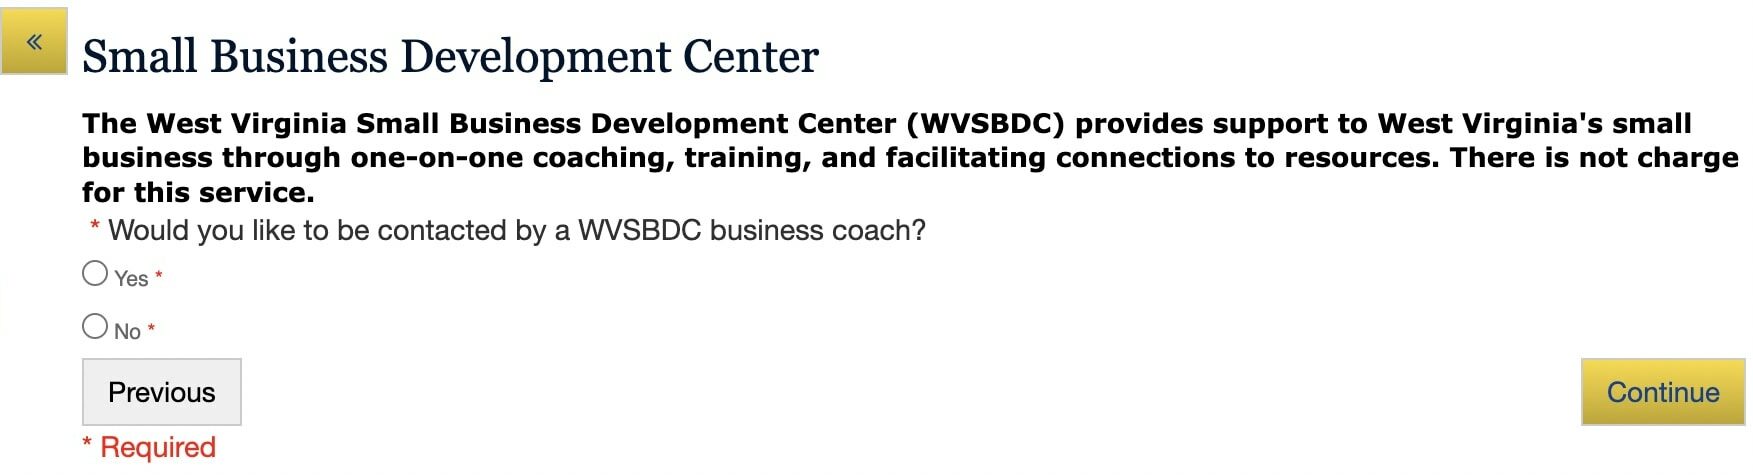 The West Virginia Small Business Development Center can help you for free if you opt in.